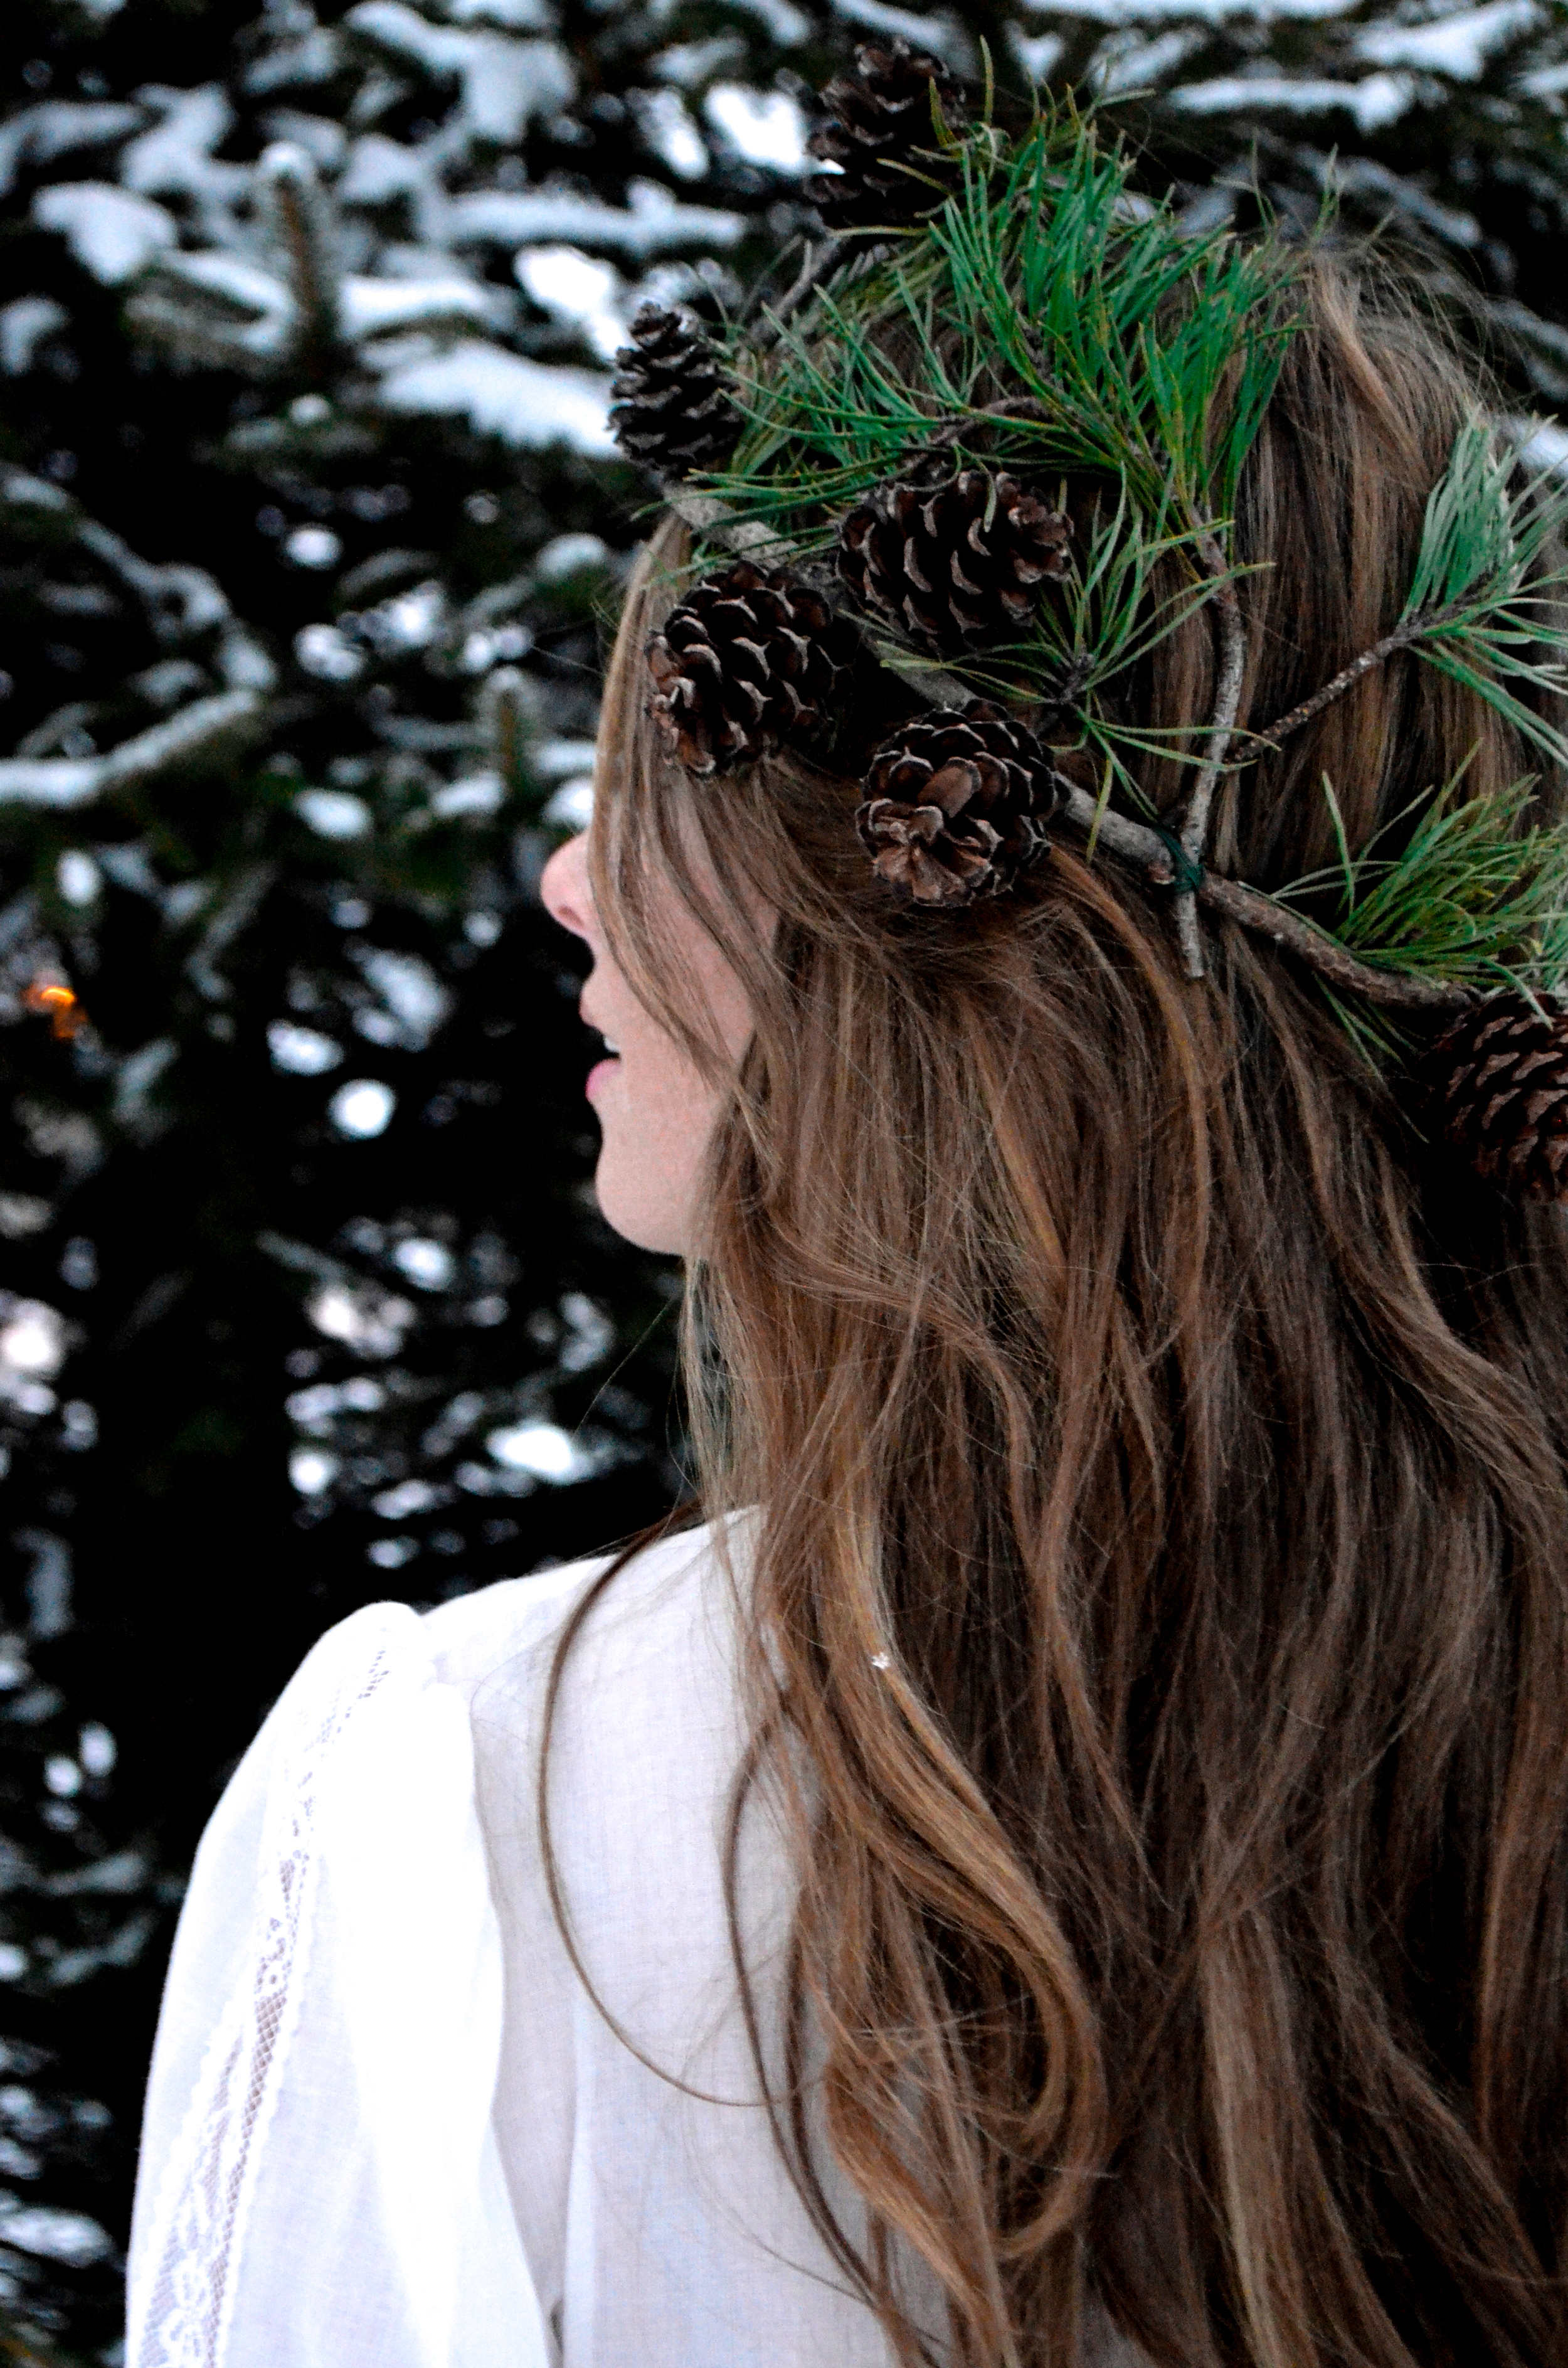 The Lion the Witch and the Wardrobe Inspired Styled Winter Photography Shoot (14 of 20).jpg